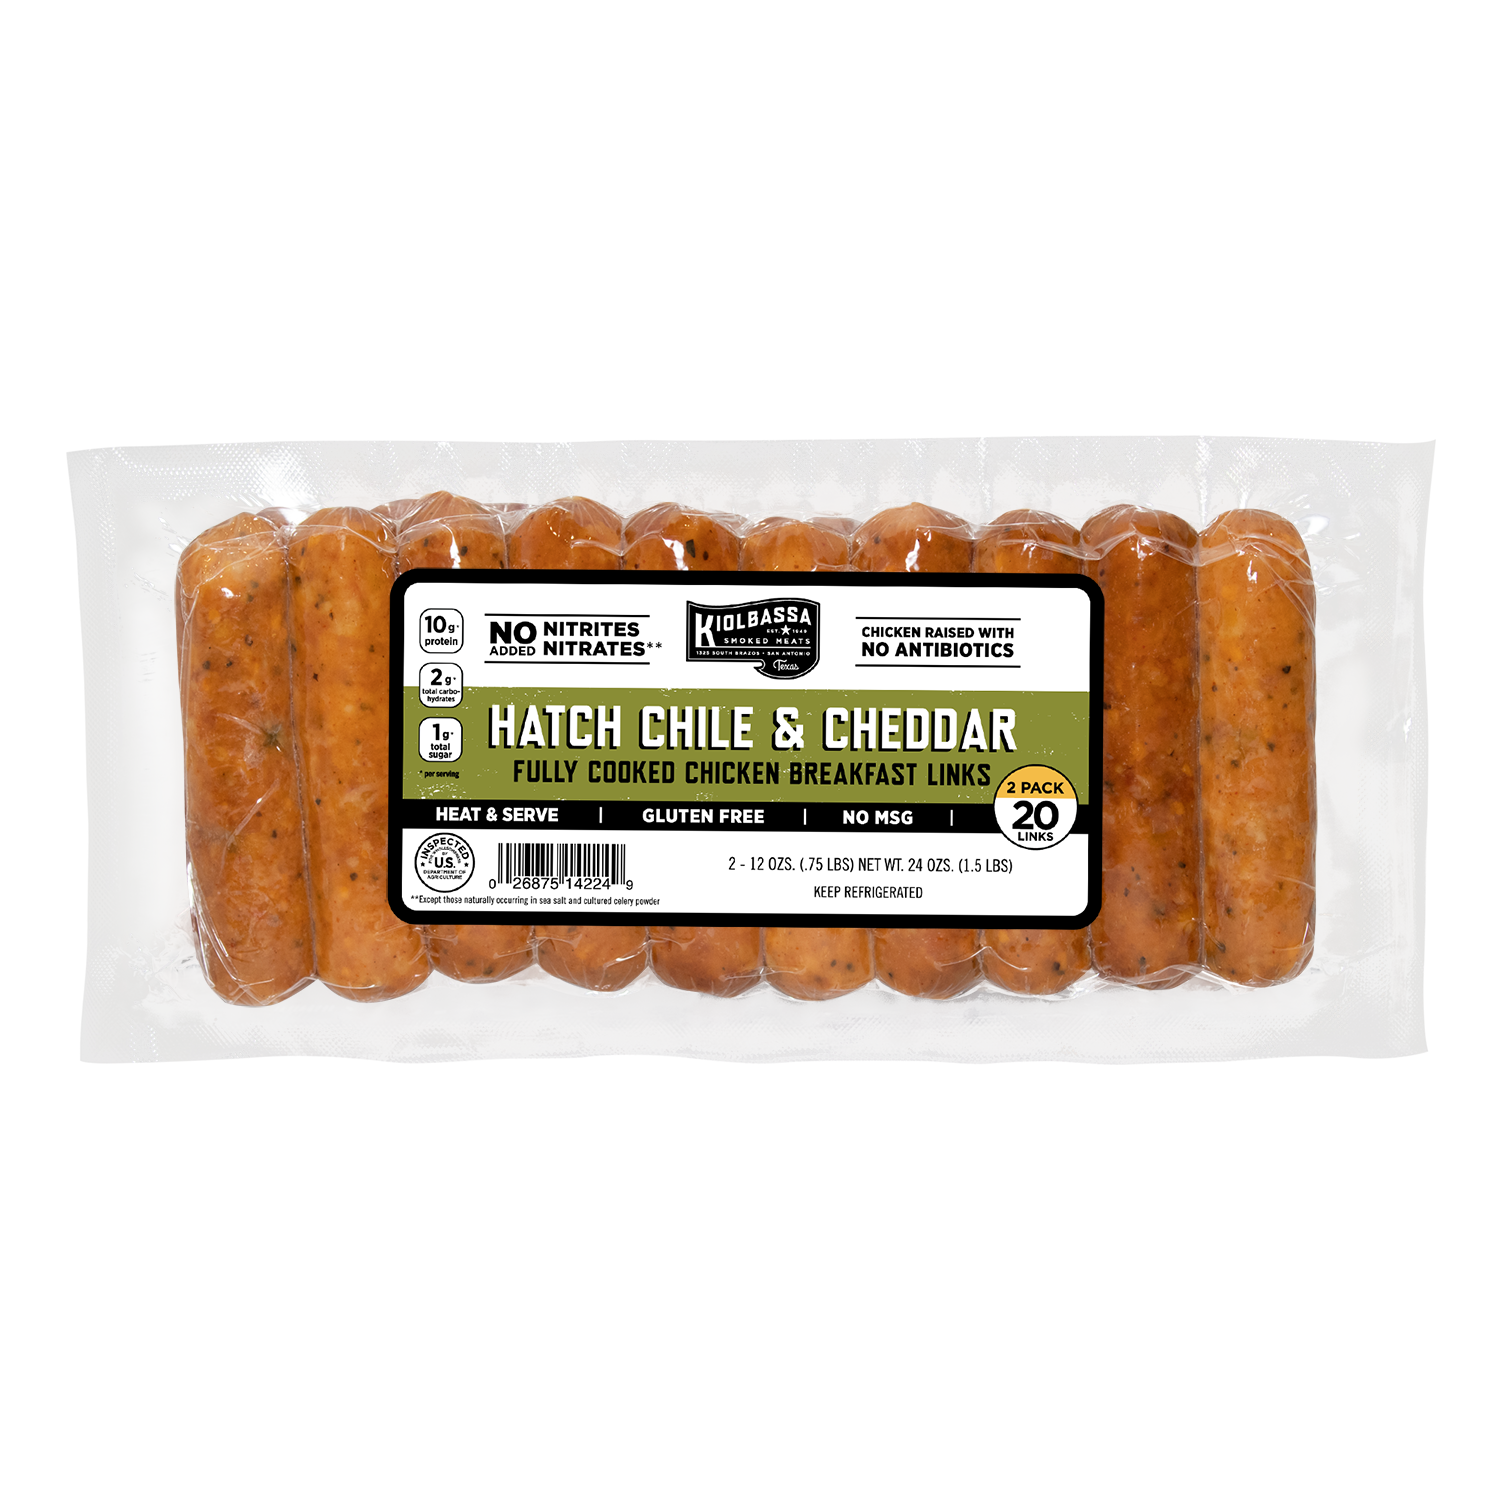 Hatch Chile & Cheddar Fully Cooked Chicken Breakfast Links